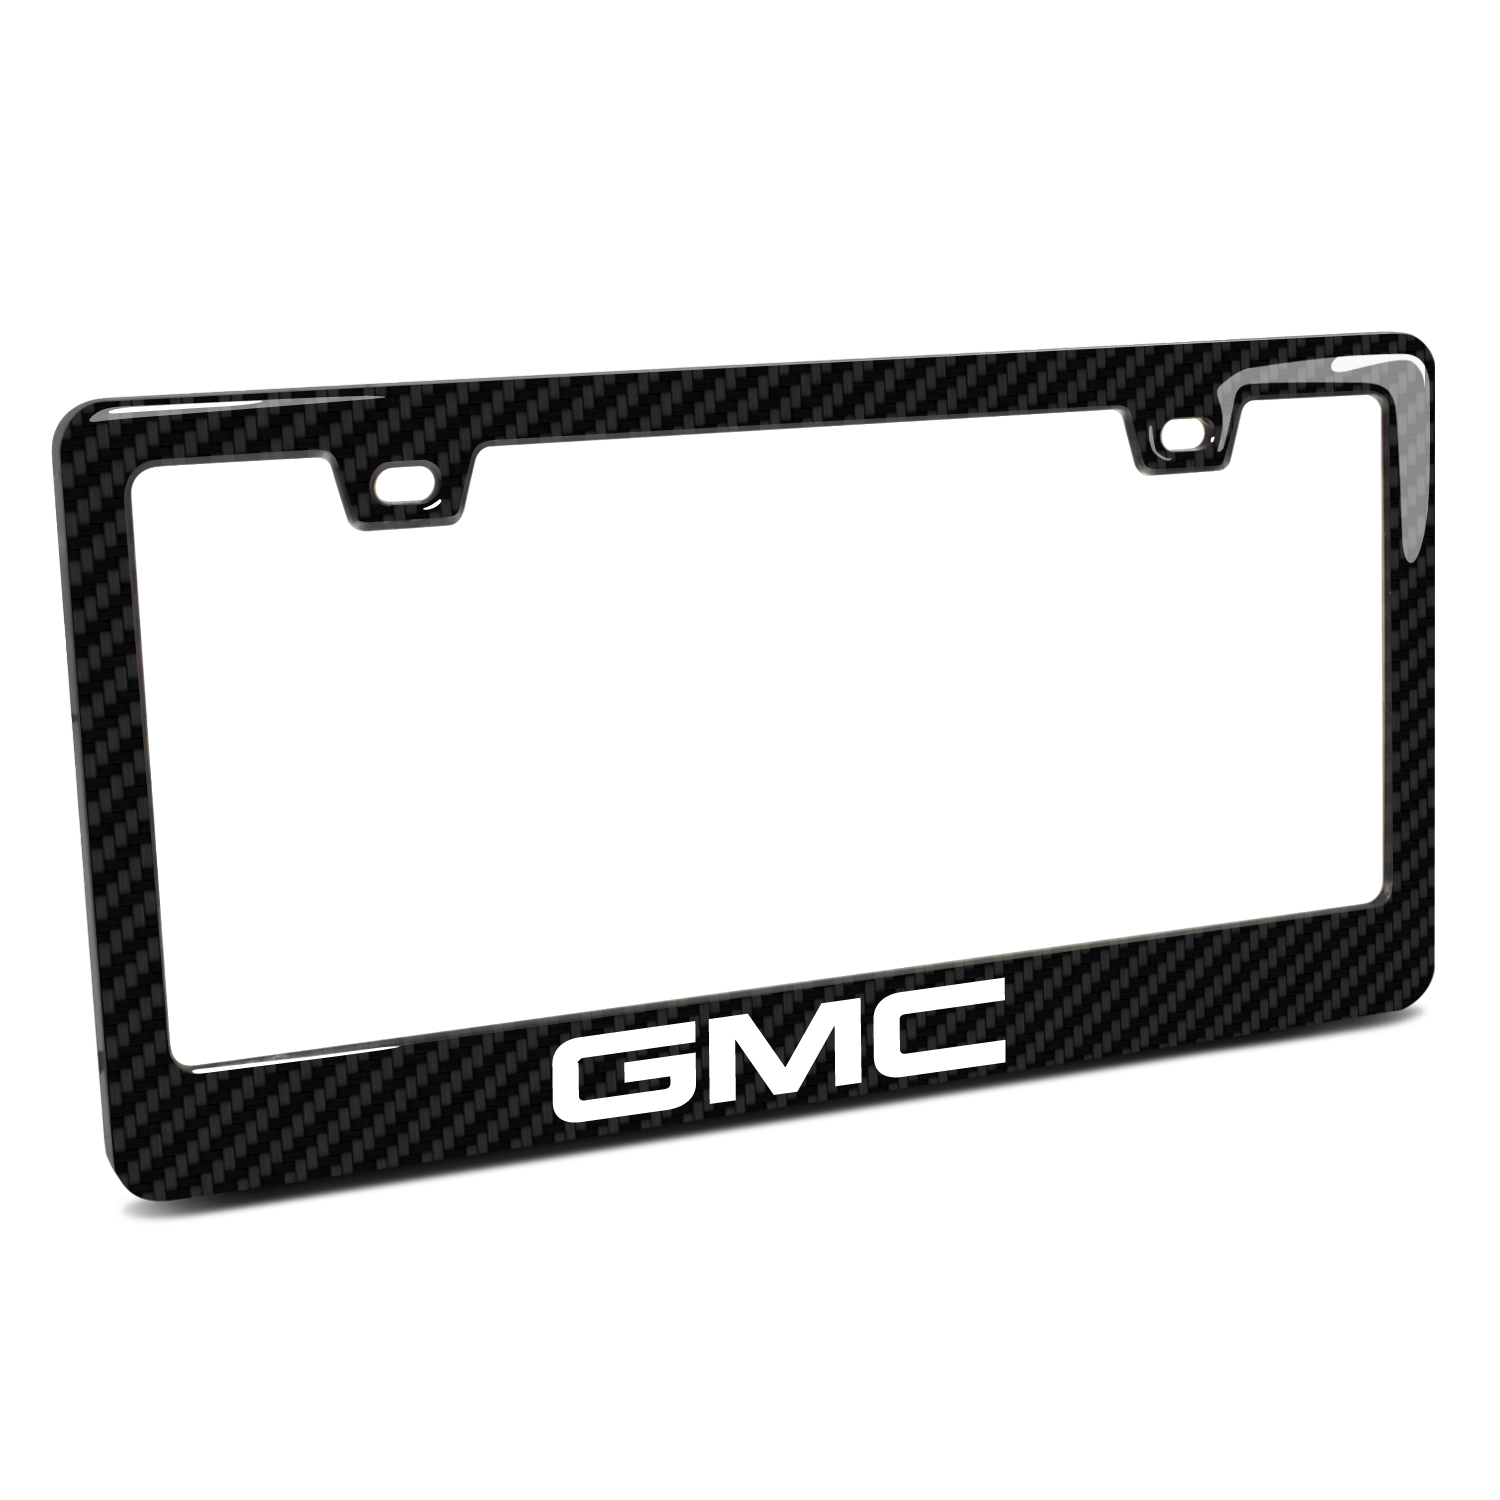 GMC in 3D on Real 3K Carbon Fiber Finish ABS Plastic License Plate Frame